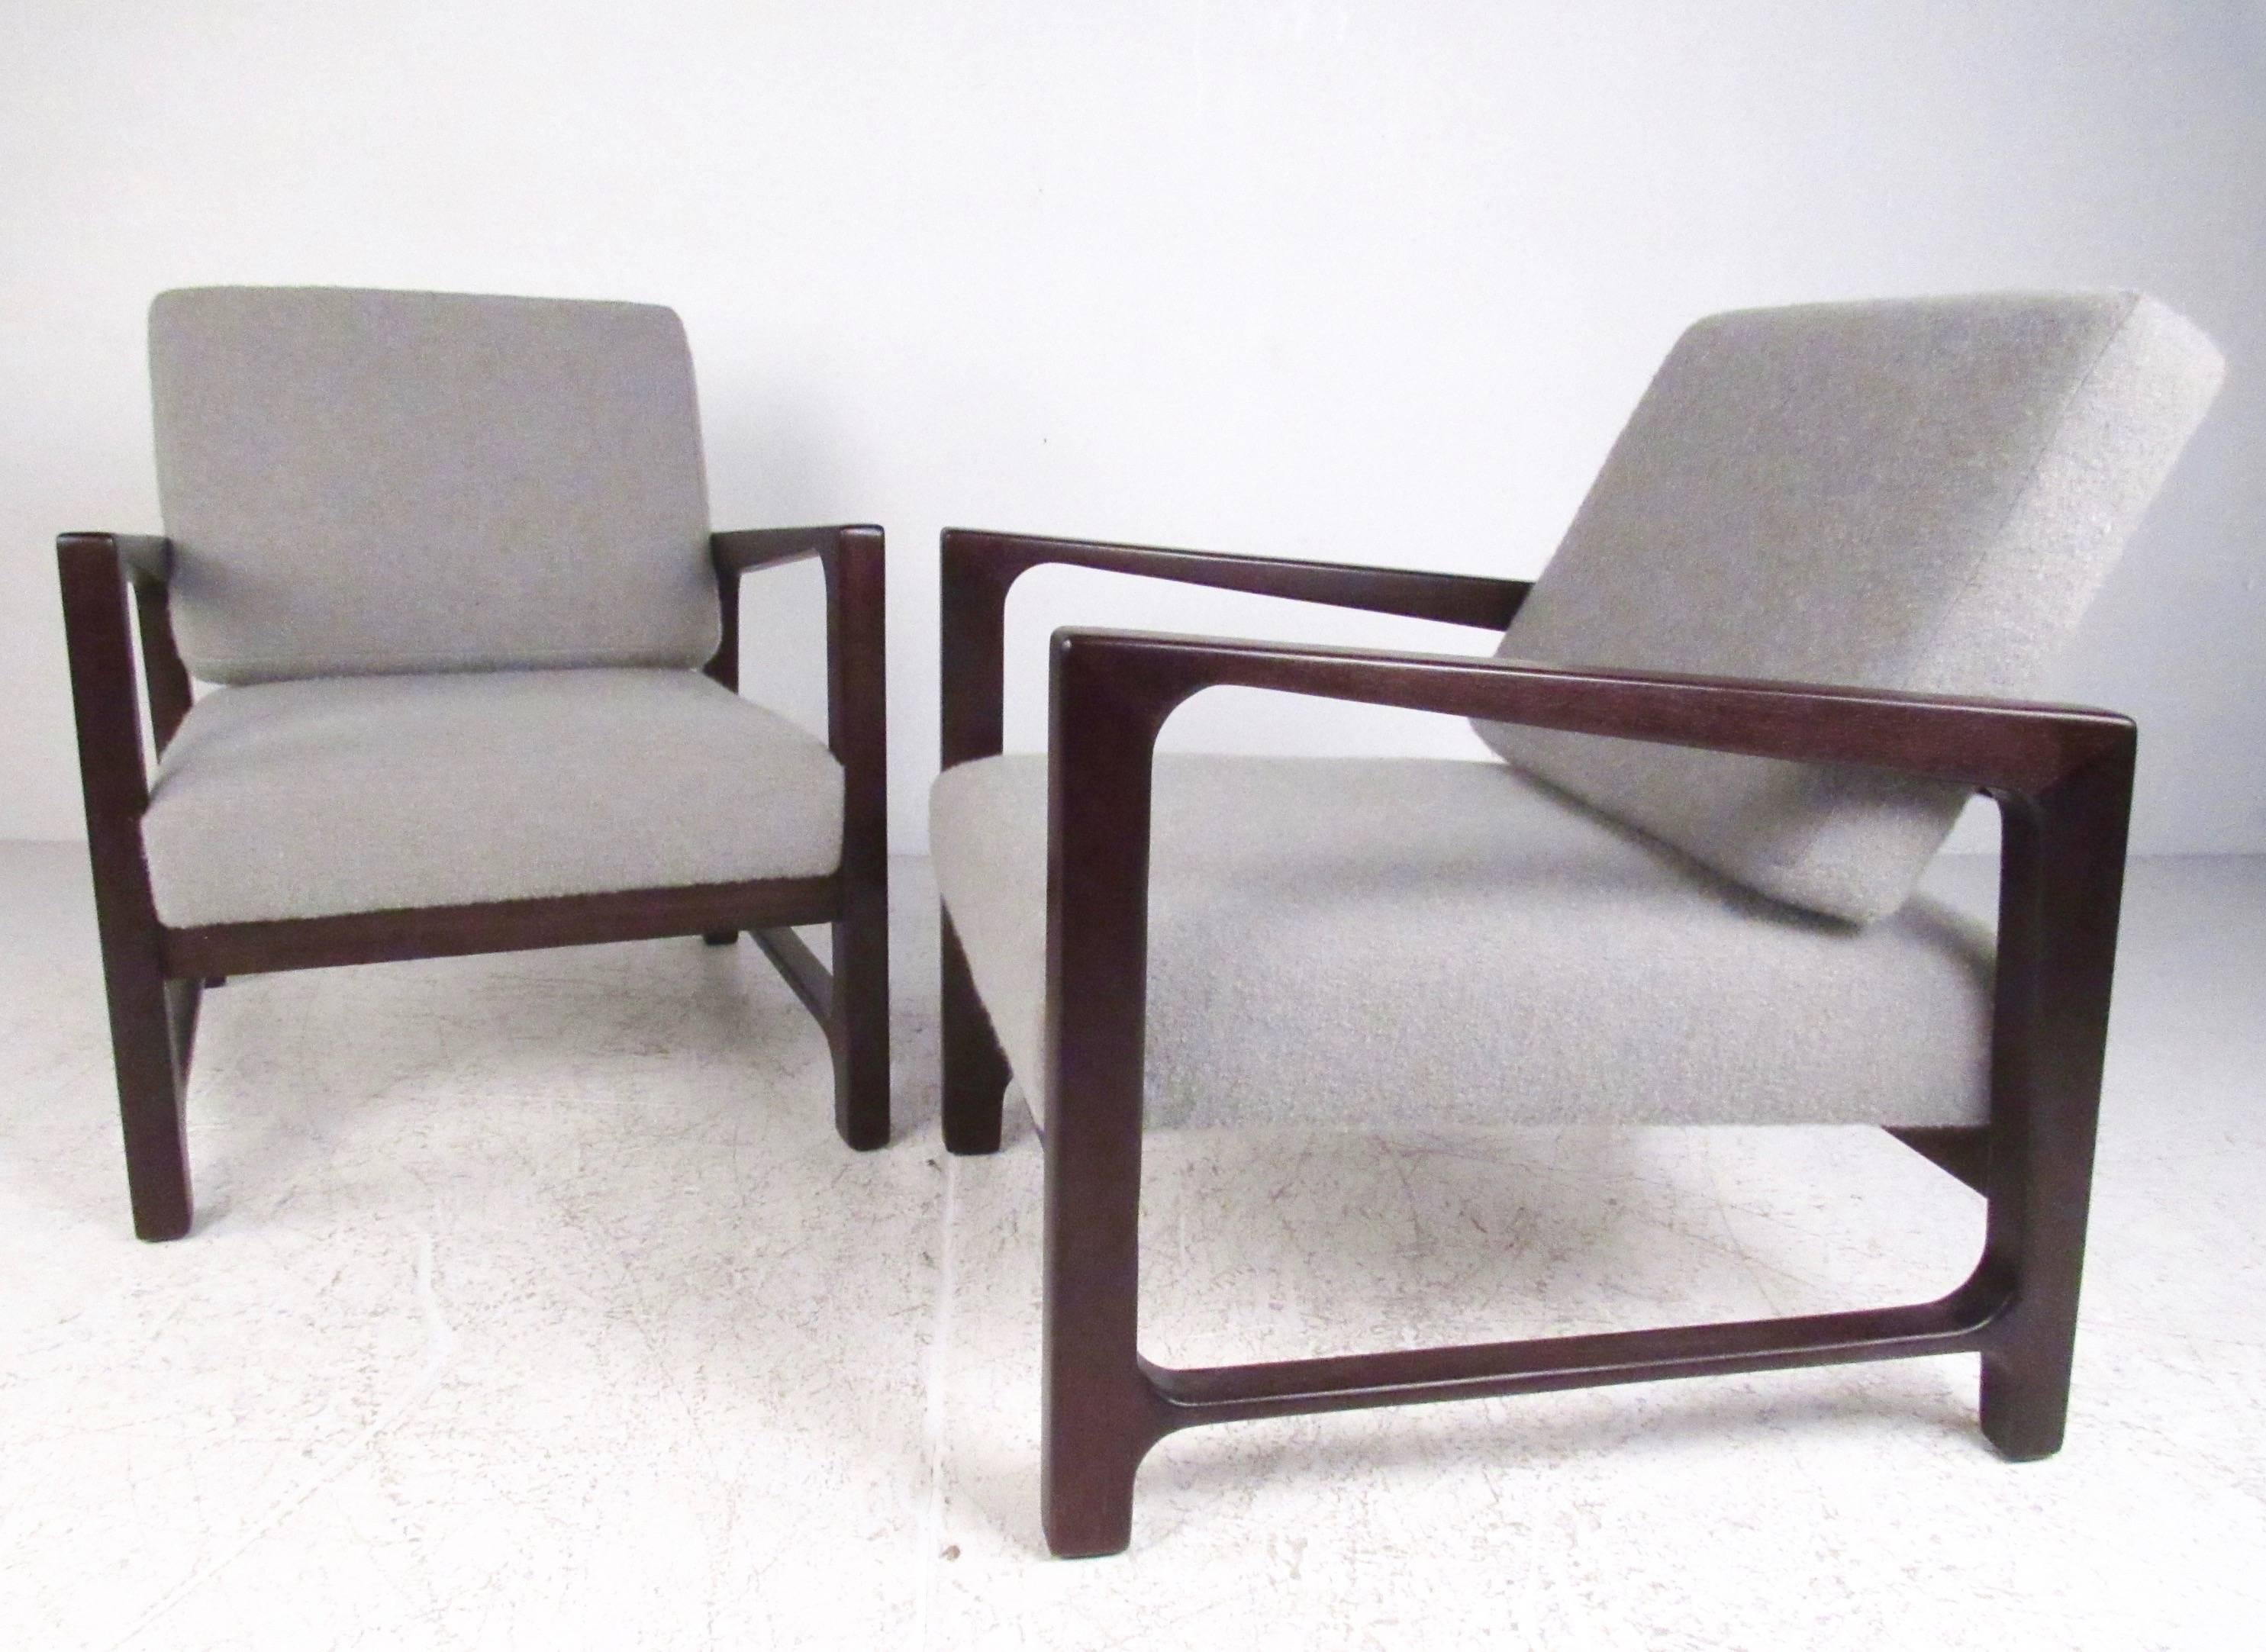 This beautiful matching pair of Harvey Probber lounge chairs feature uniquely sculpted rosewood frames with plush upholstered seating. Unique lines and cutaway hardwood seat back add to the iconic mid-century style of this set of lounge chairs,